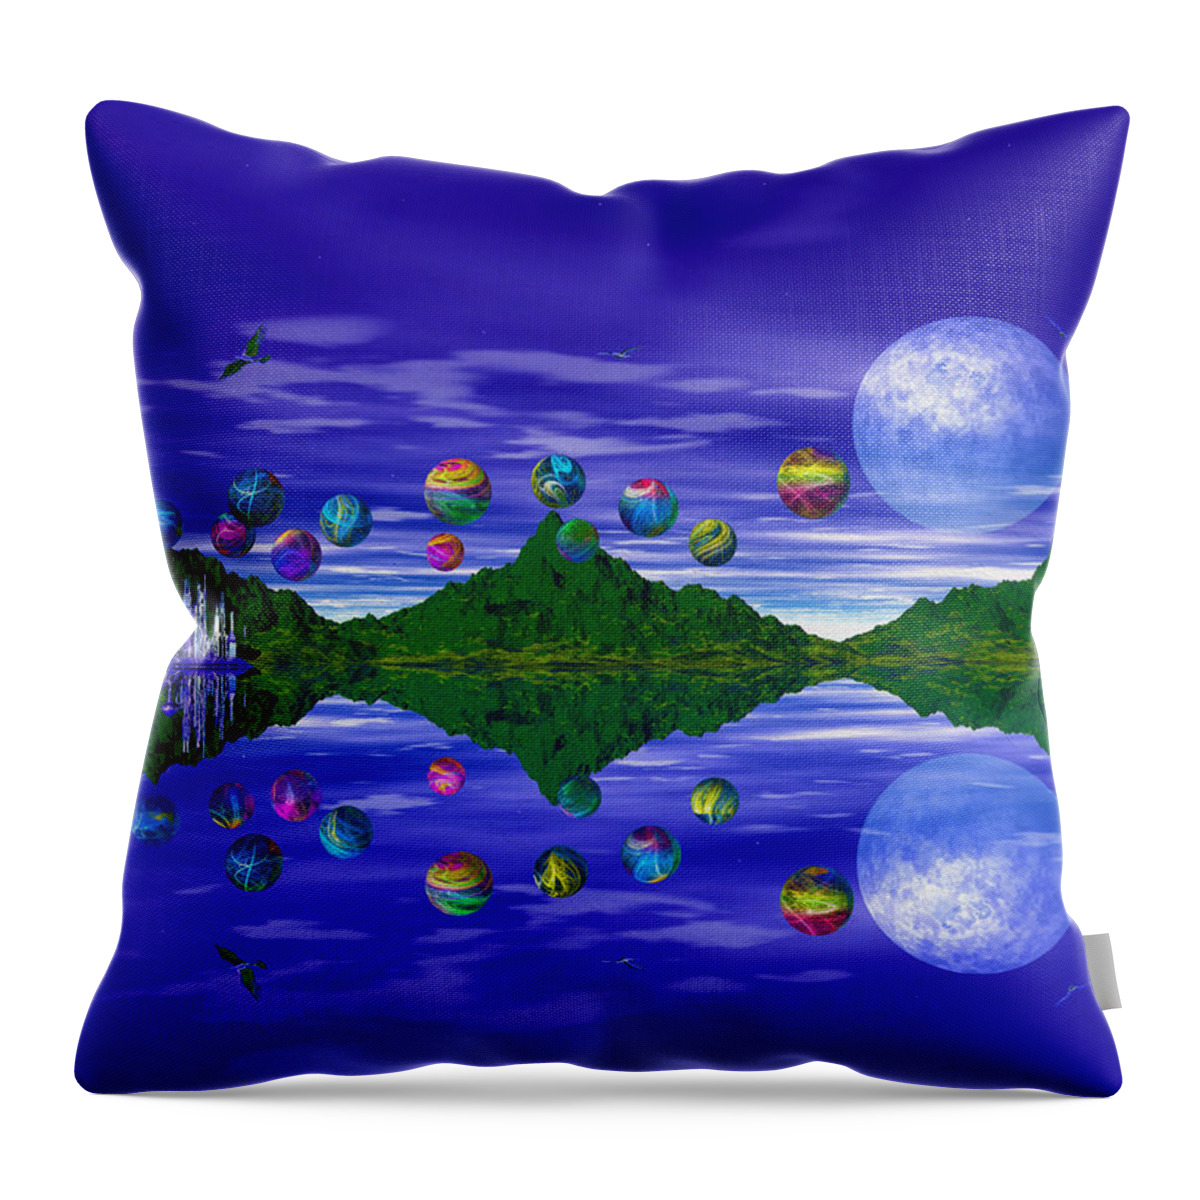 Palace Throw Pillow featuring the photograph Silver Palace by Mark Blauhoefer